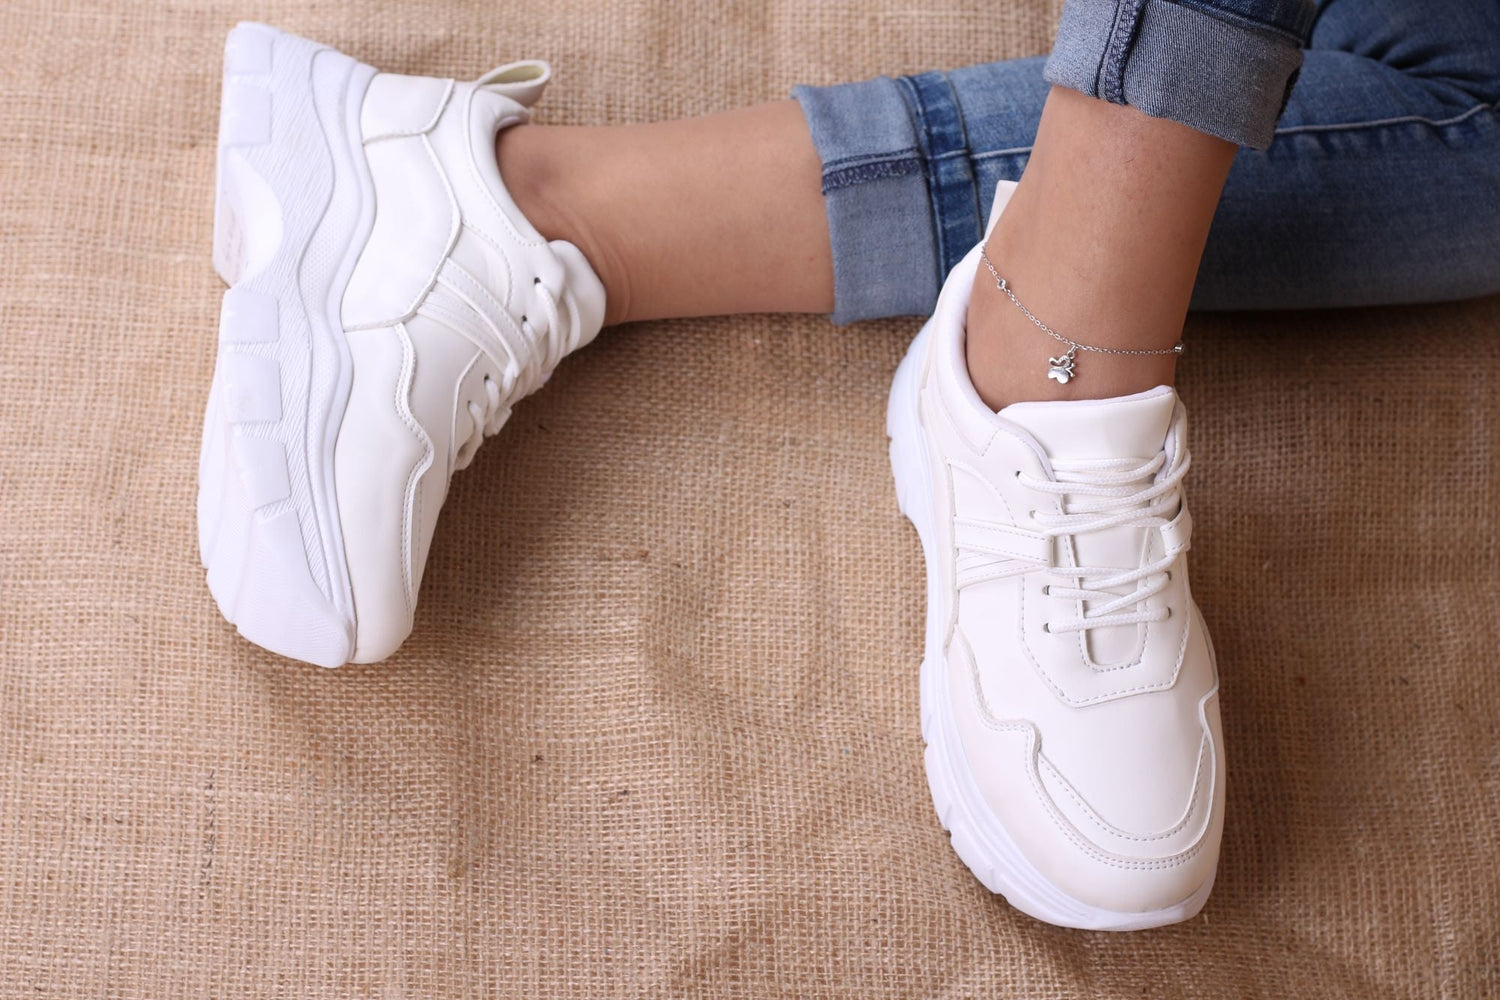 Women's white leather high-sole sneakers. Lightweight sneakers for ease of movement designed to the satisfaction of all customers. solid template. Buy now stylish and comfortable sneakers from shoppingooo, suitable for all occasions